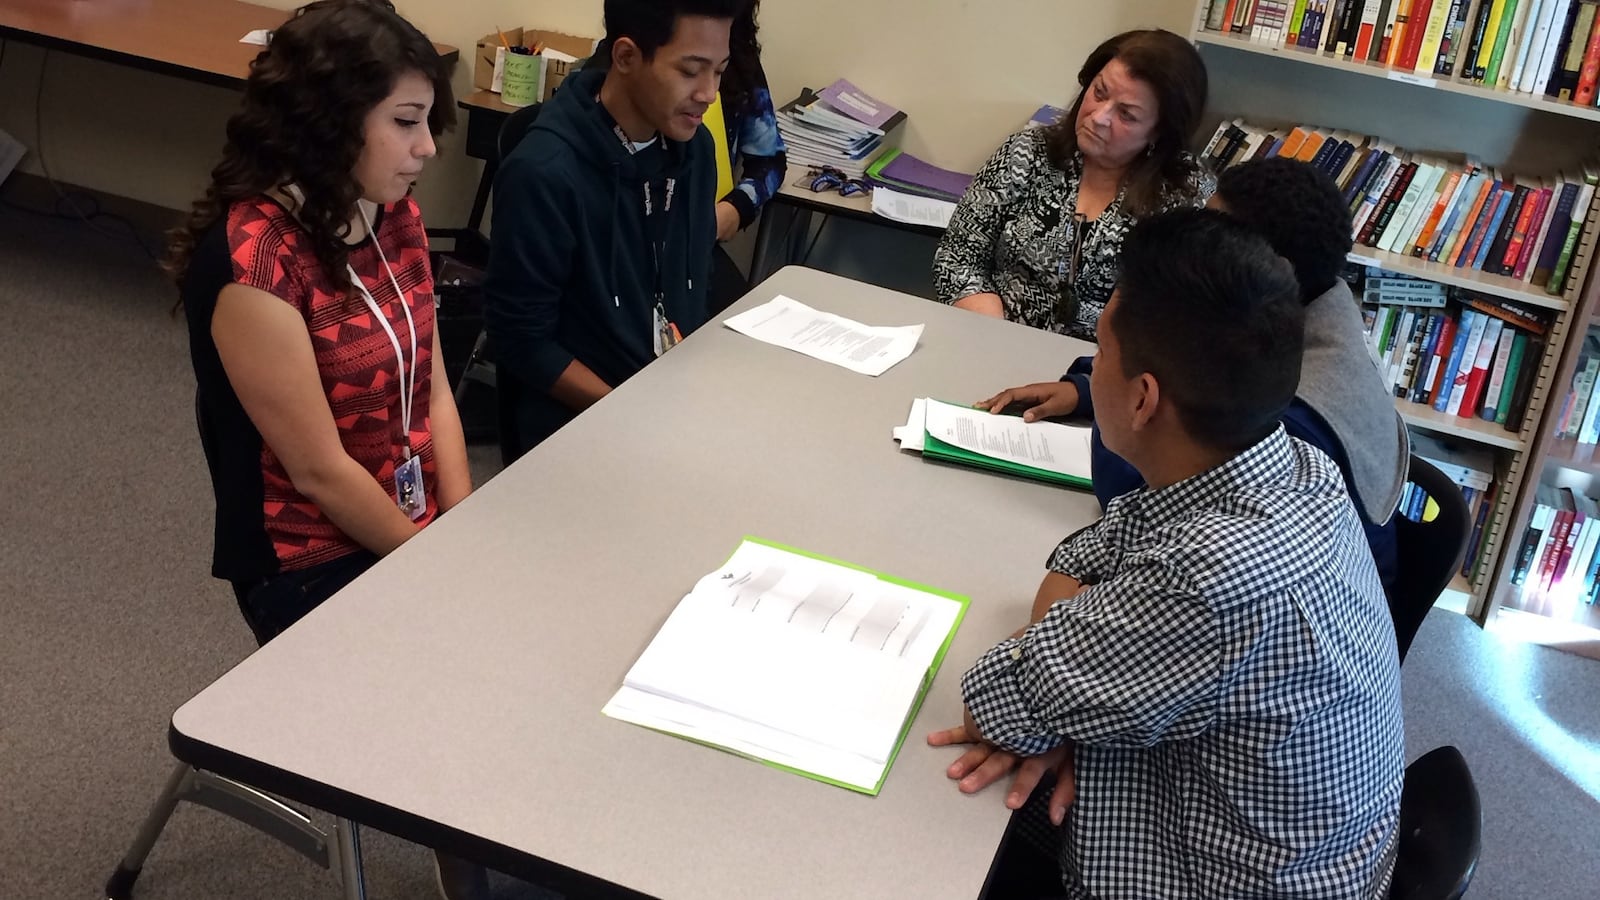 High school students role play a restorative justice seminar with their counselor in this Chalkbeat file photo.